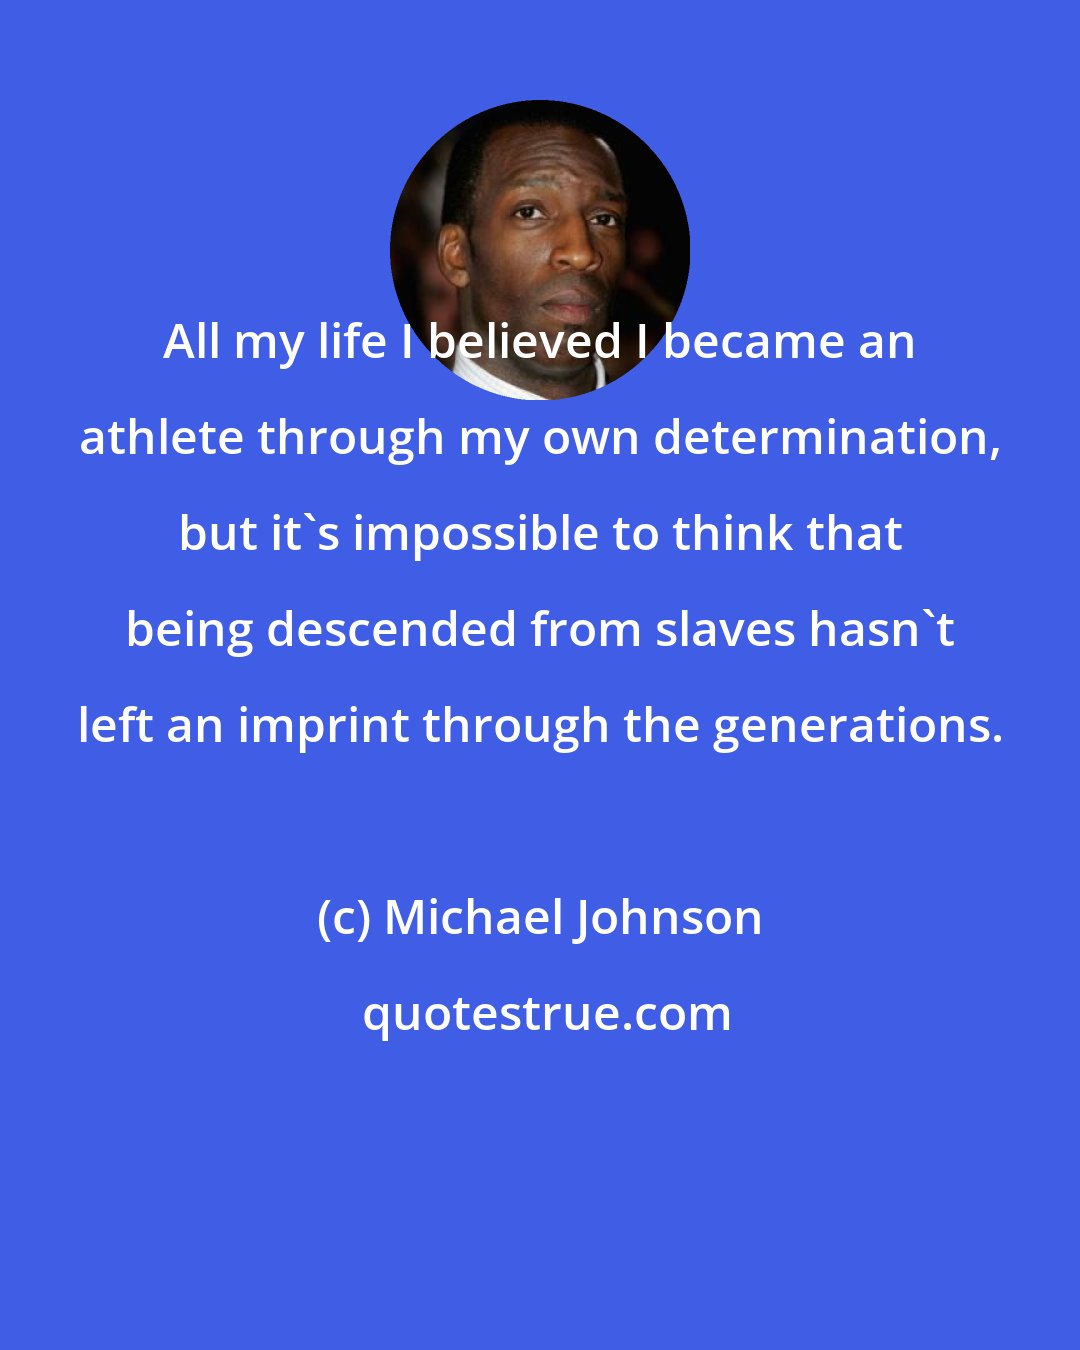 Michael Johnson: All my life I believed I became an athlete through my own determination, but it's impossible to think that being descended from slaves hasn't left an imprint through the generations.